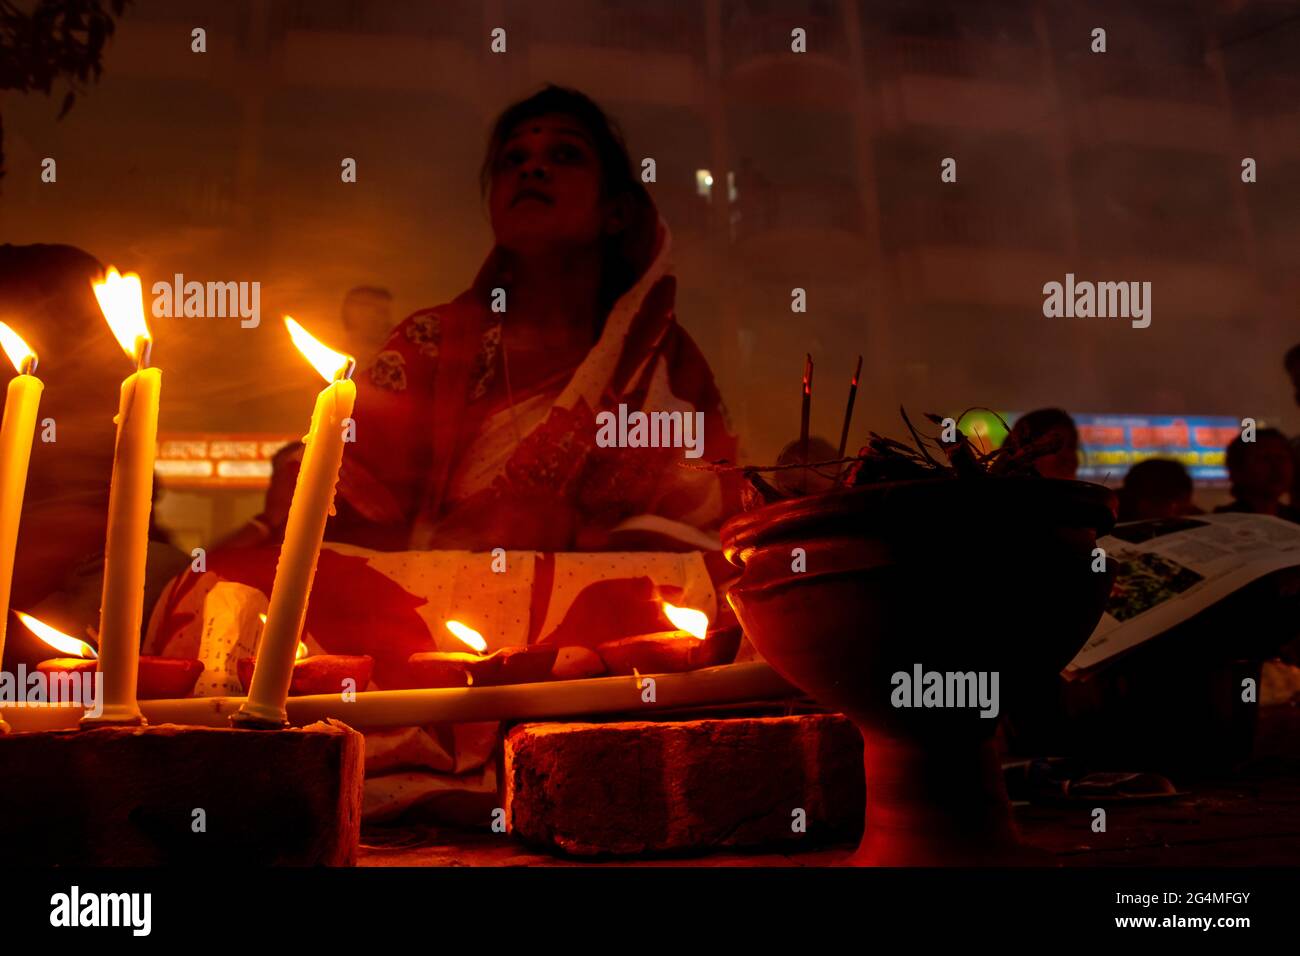 The biggest ritual activity of Hinduism, it's called Rakher upobas, all Hindus participate in these religious events every year. I captured this image Stock Photo